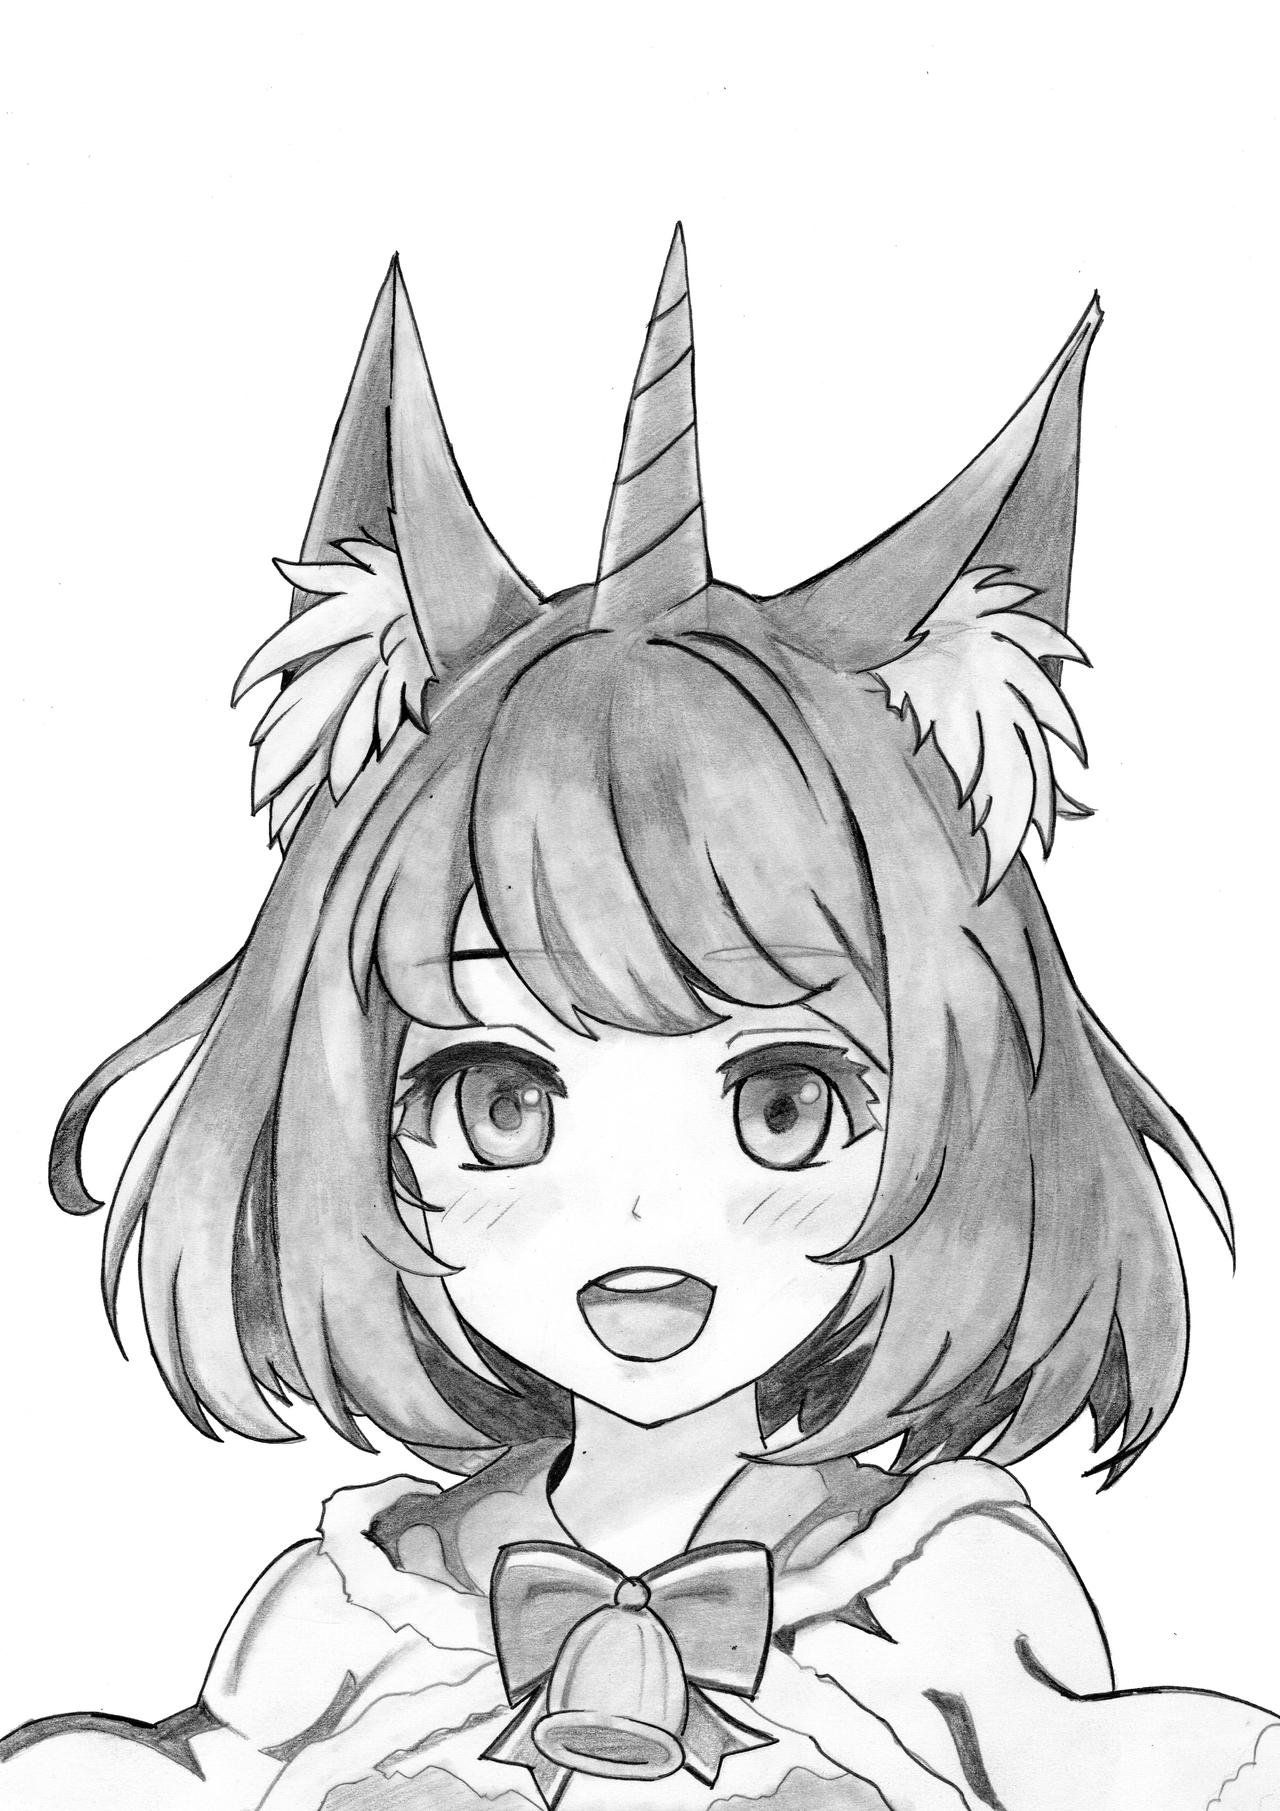 Drawing Cute Anime Unicorn Girl by DrawingTimeWithMe on DeviantArt